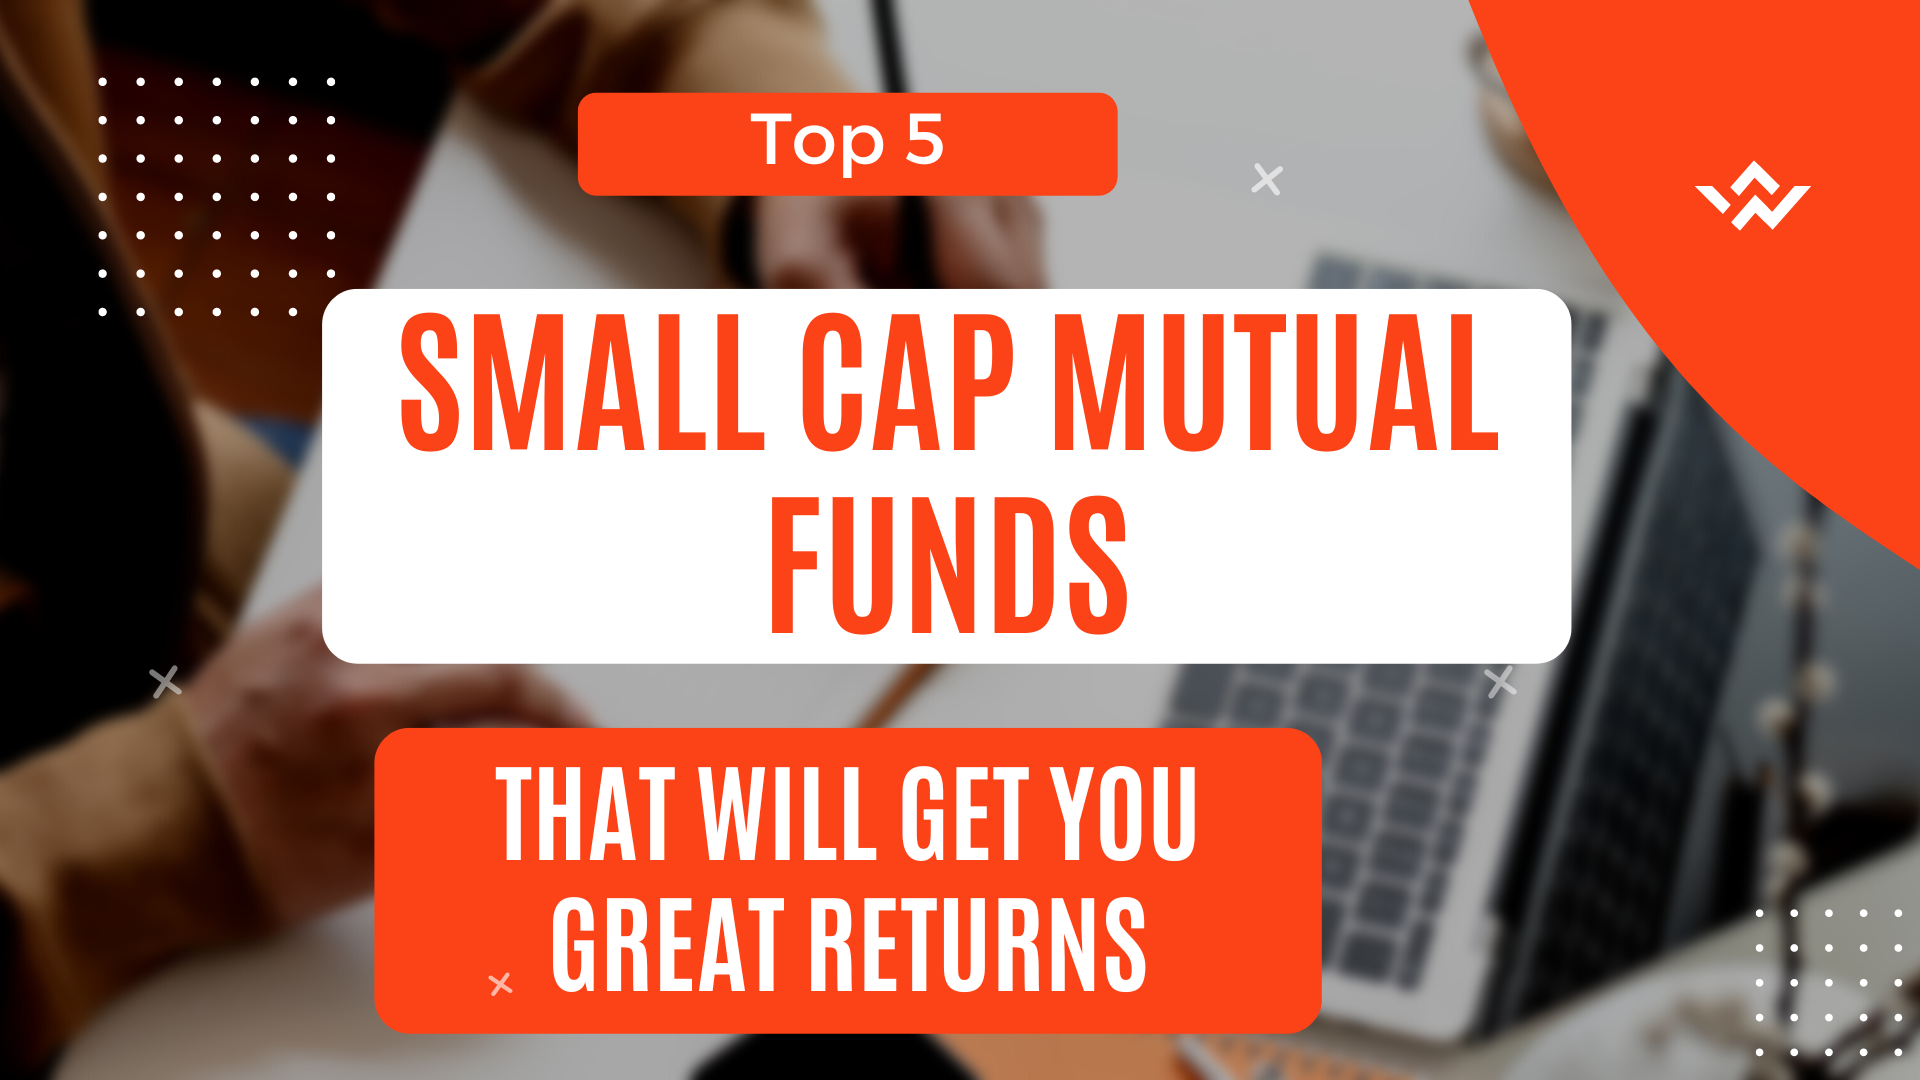 Top 5 Small Cap Mutual Funds That Will Get You Great Returns